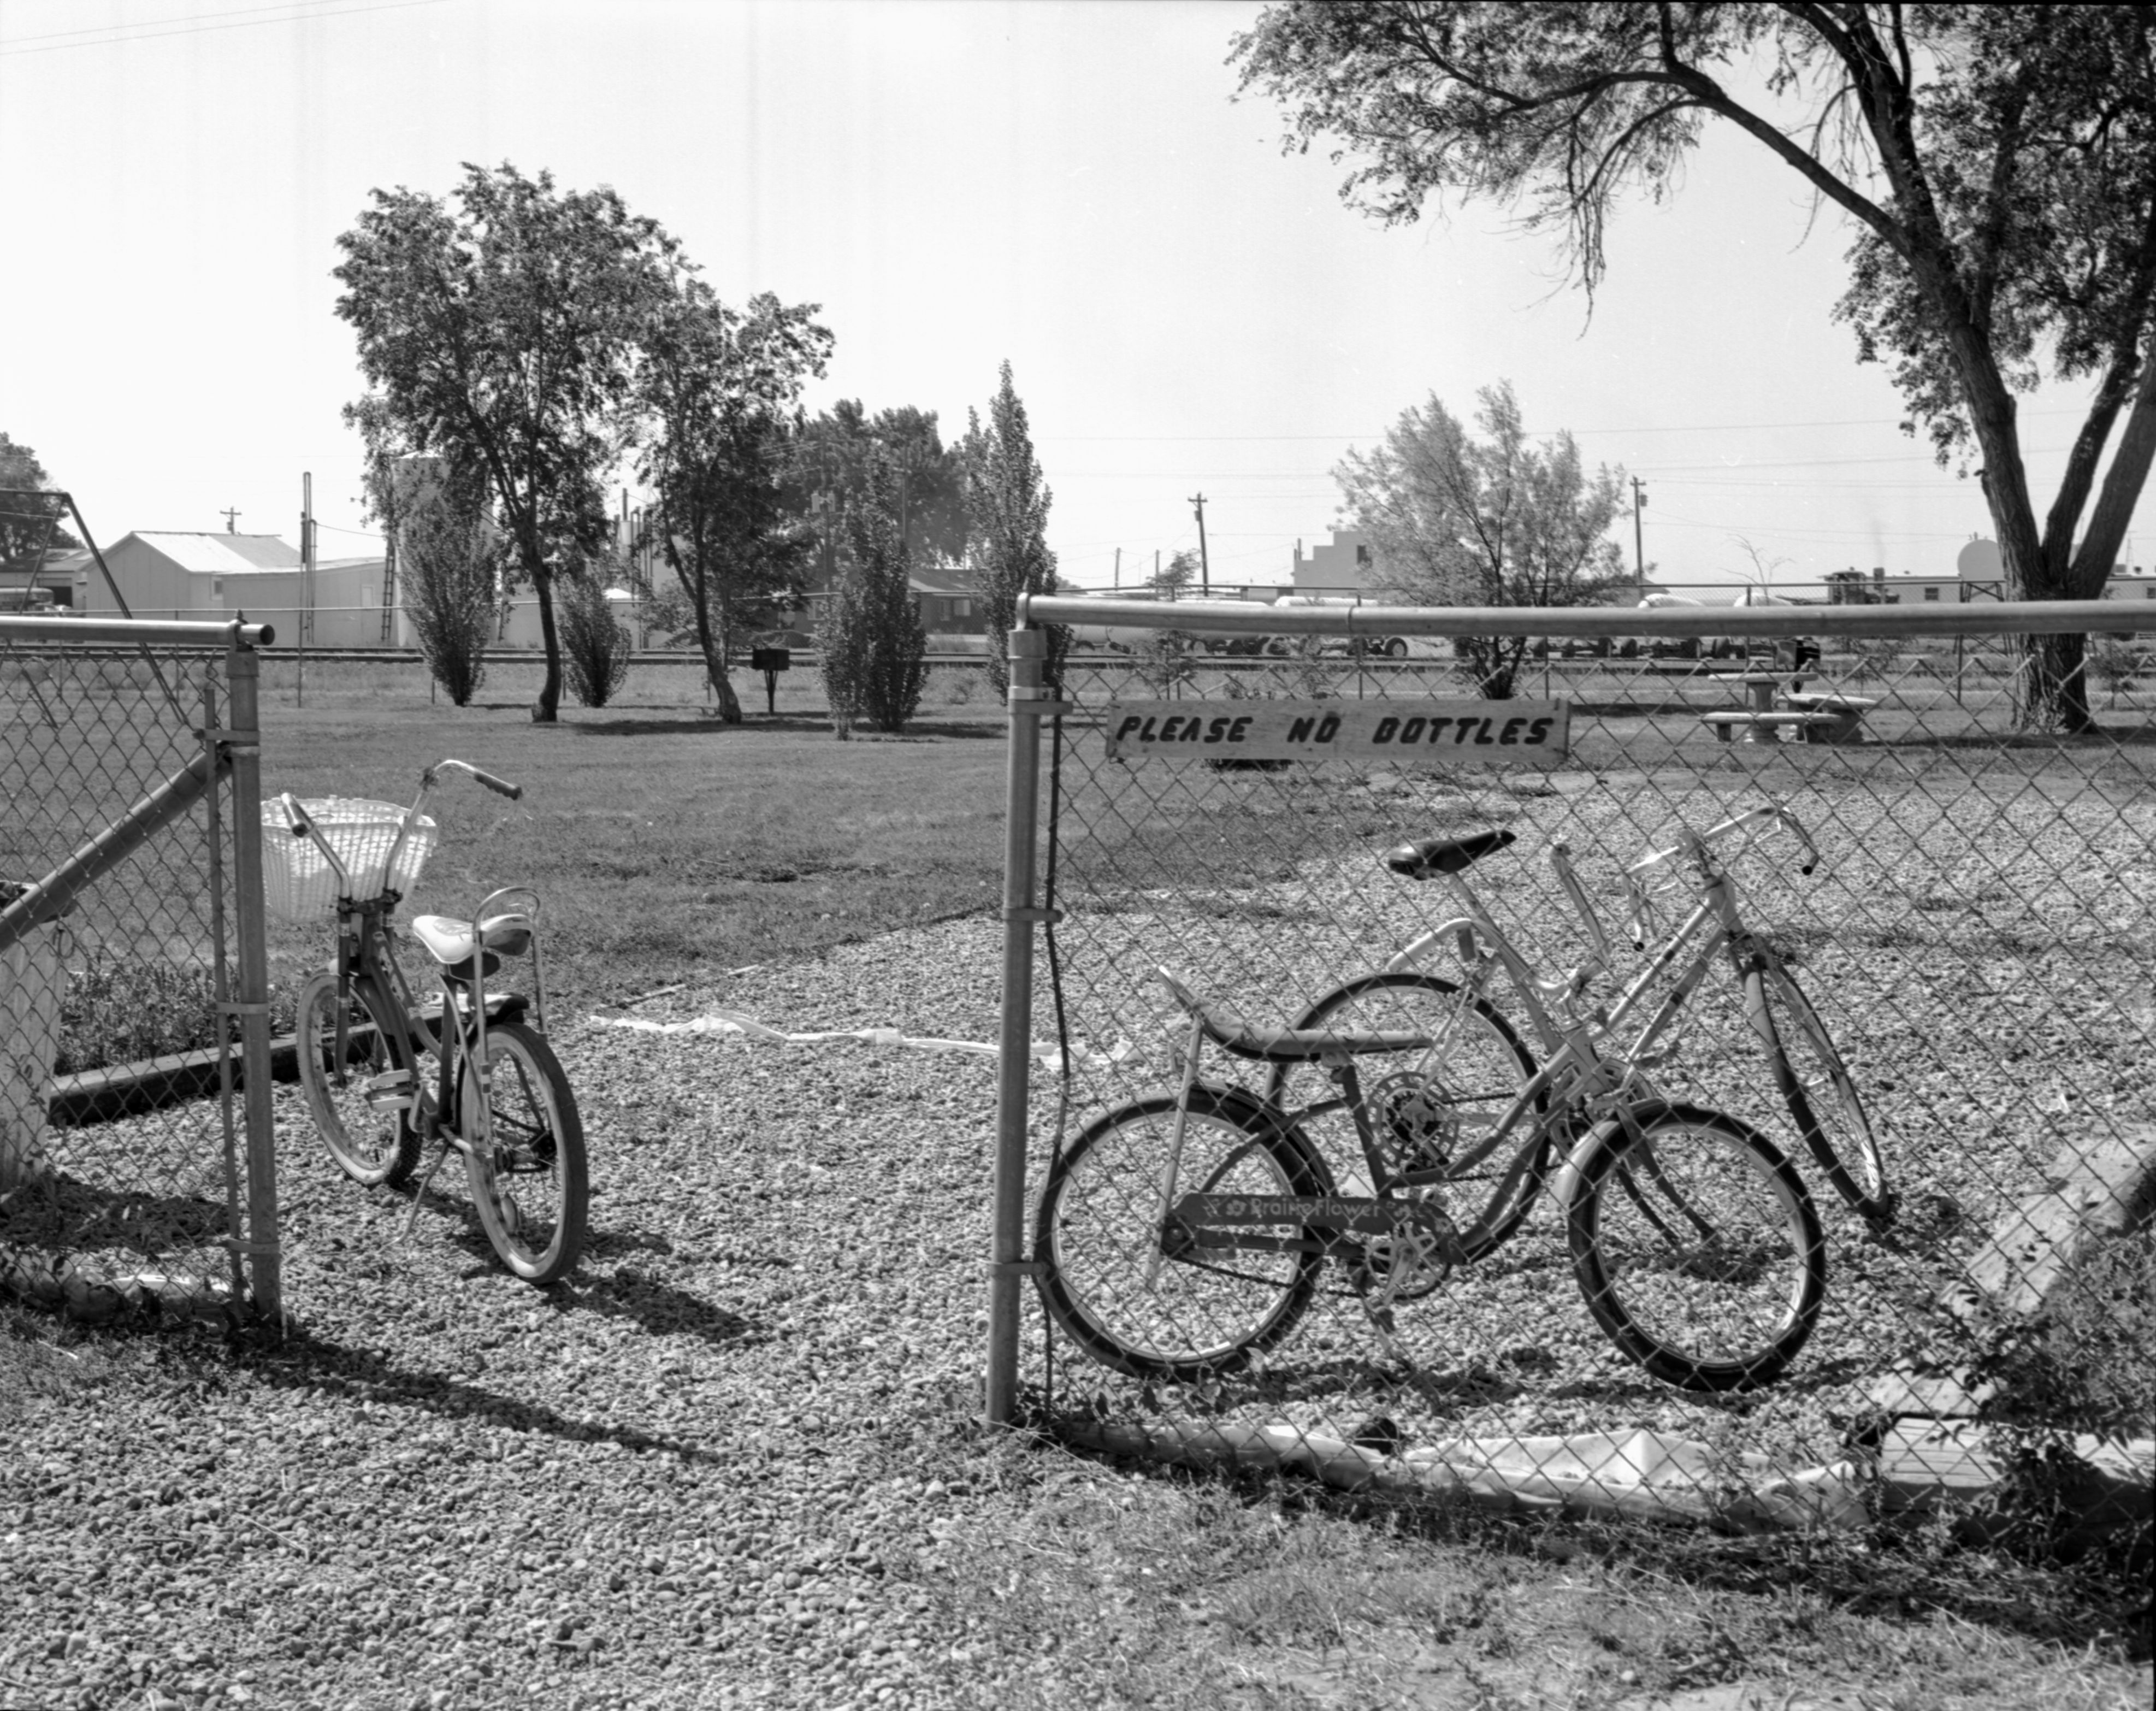 Photo of 3 kids' bicycles parked just inside of the chain link fence surrounding a municipal park. The sign next to the open gateway says "Please no bottles." The park grounds are of grass, with a few trees on the opposite side, and a round picnic table. The skies are clear and there is no one in the park on this day.